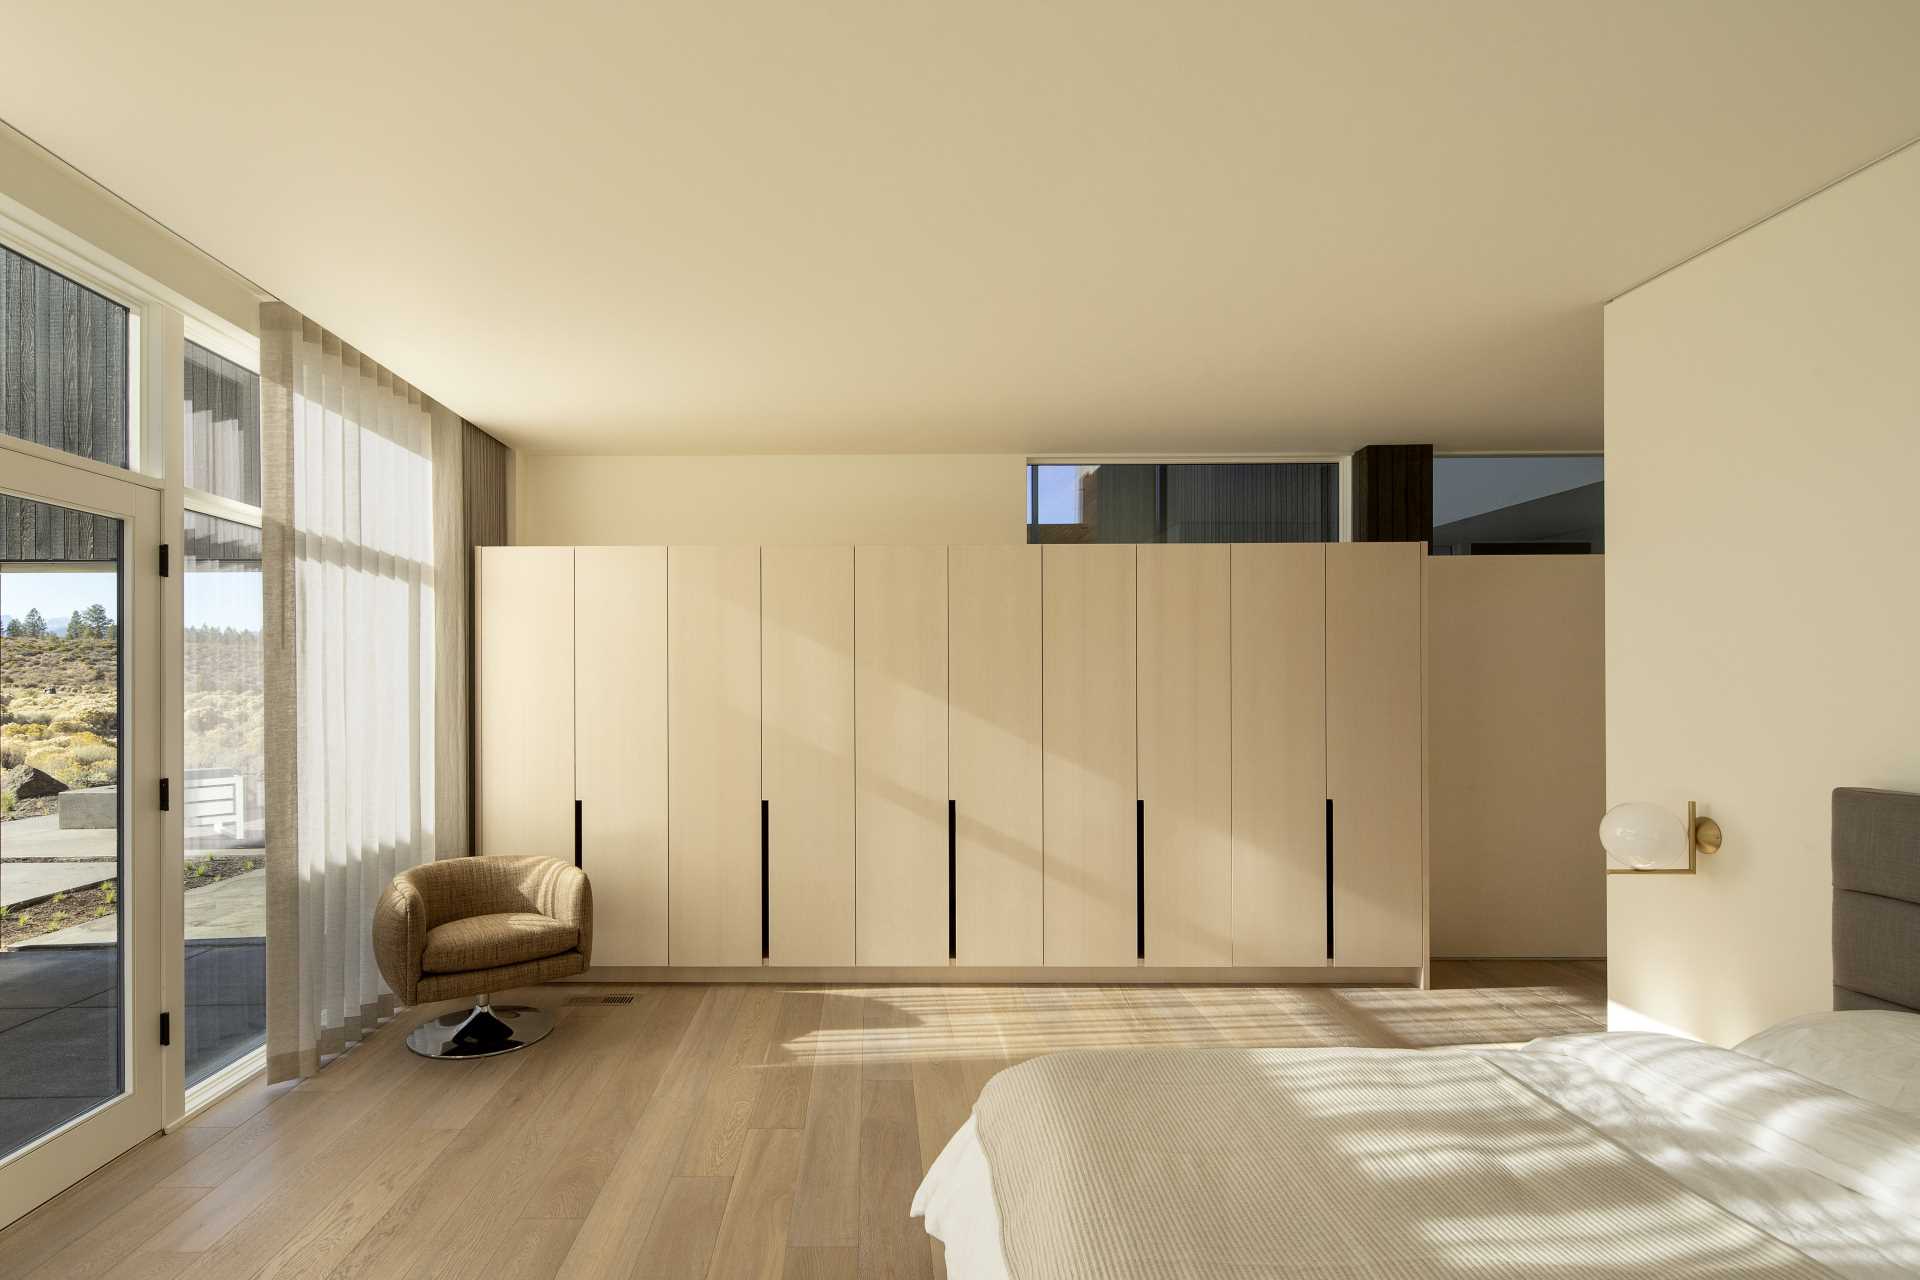 In this modern bedroom, light wood cabinets complement the light walls, floors, and bedding.